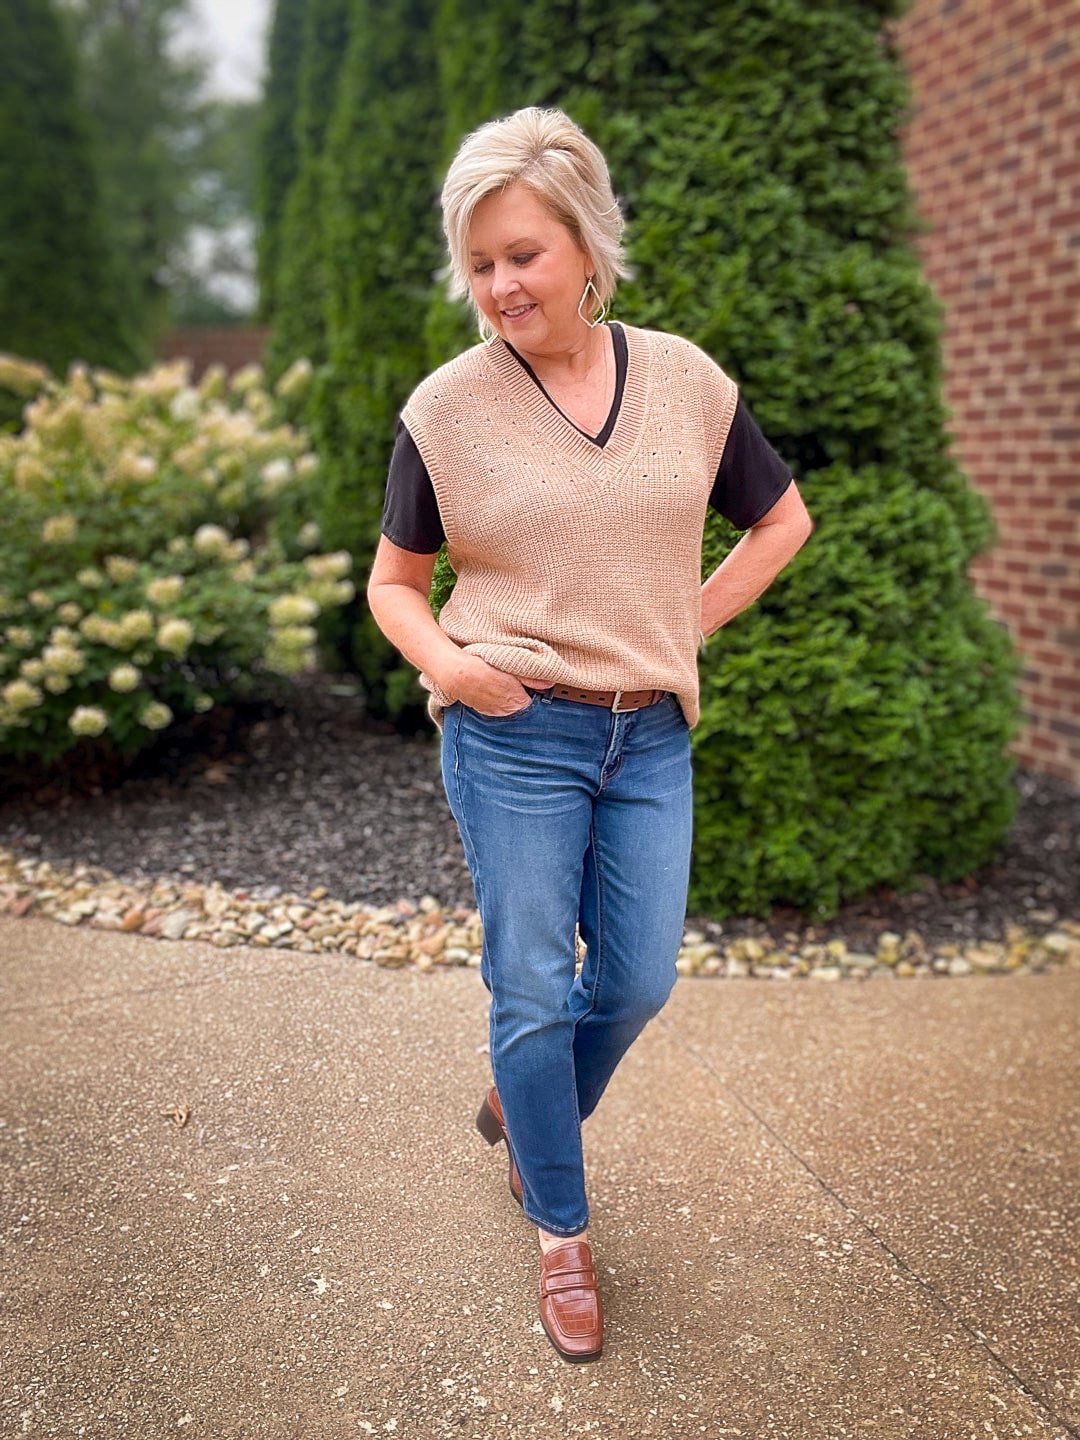 Over 40 Fashion Blogger, Tania Stephens is wearing a tan vest for fall from Walmart19